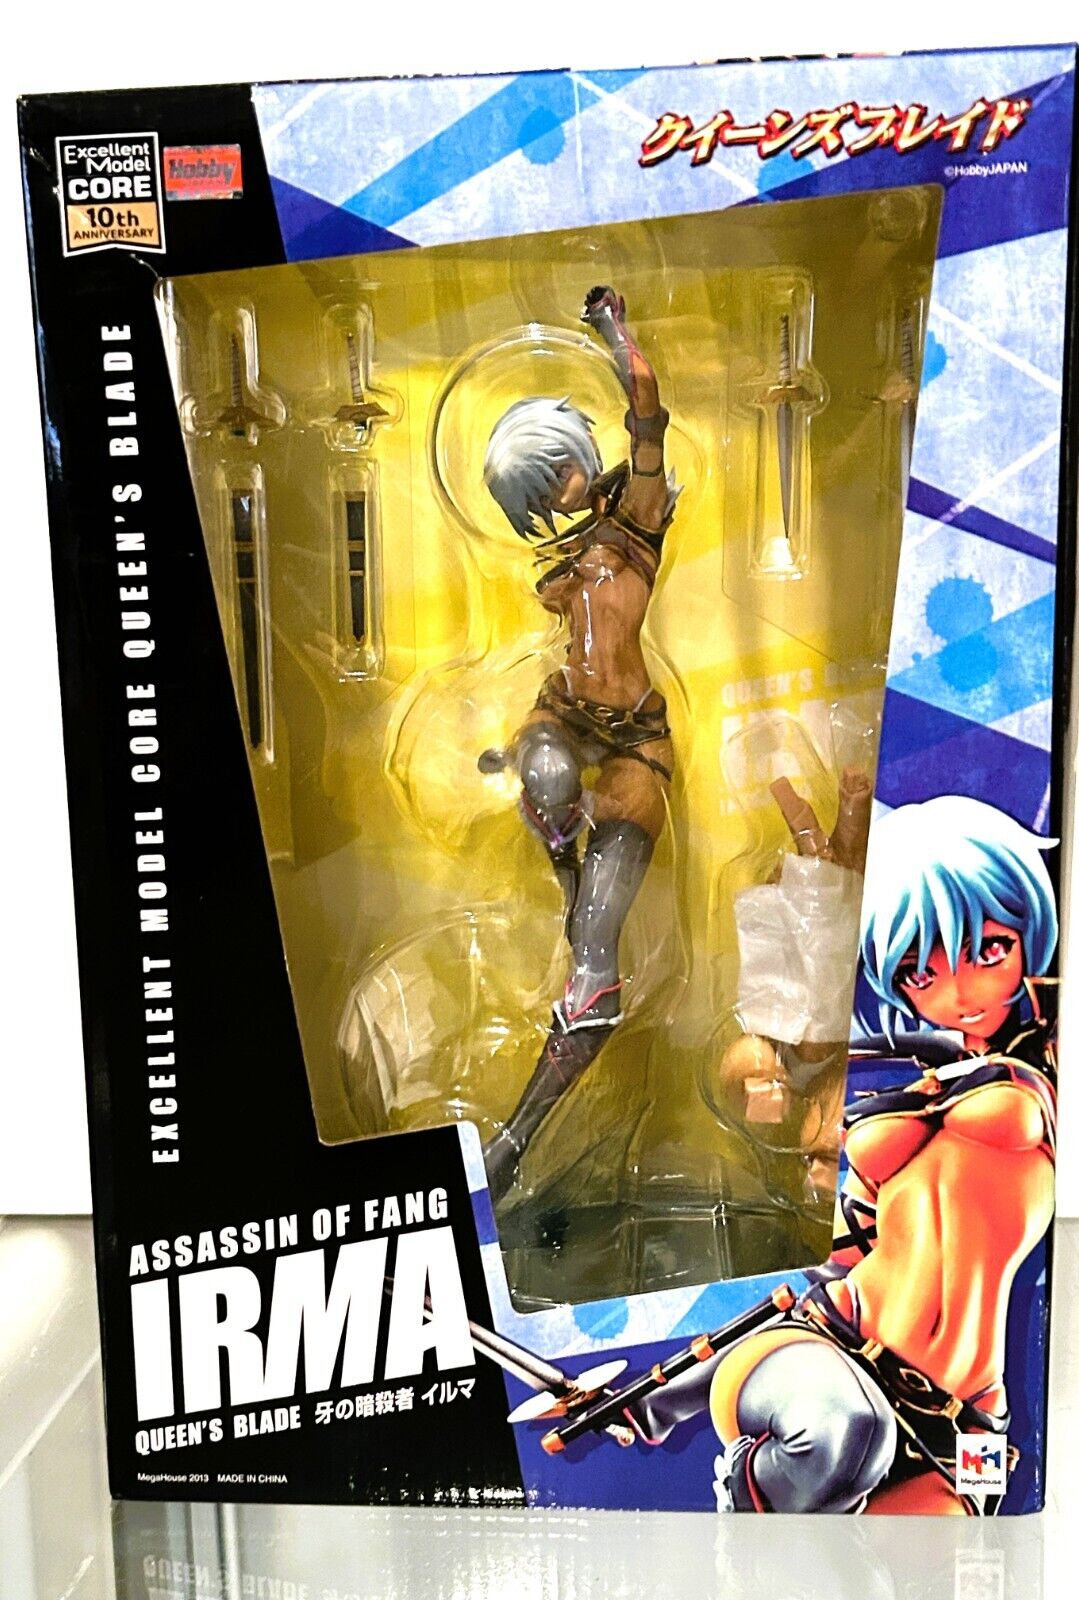 Excellent Model Core Queen\'s Blade Assassin of Fang Irma Anime Figure Megahouse